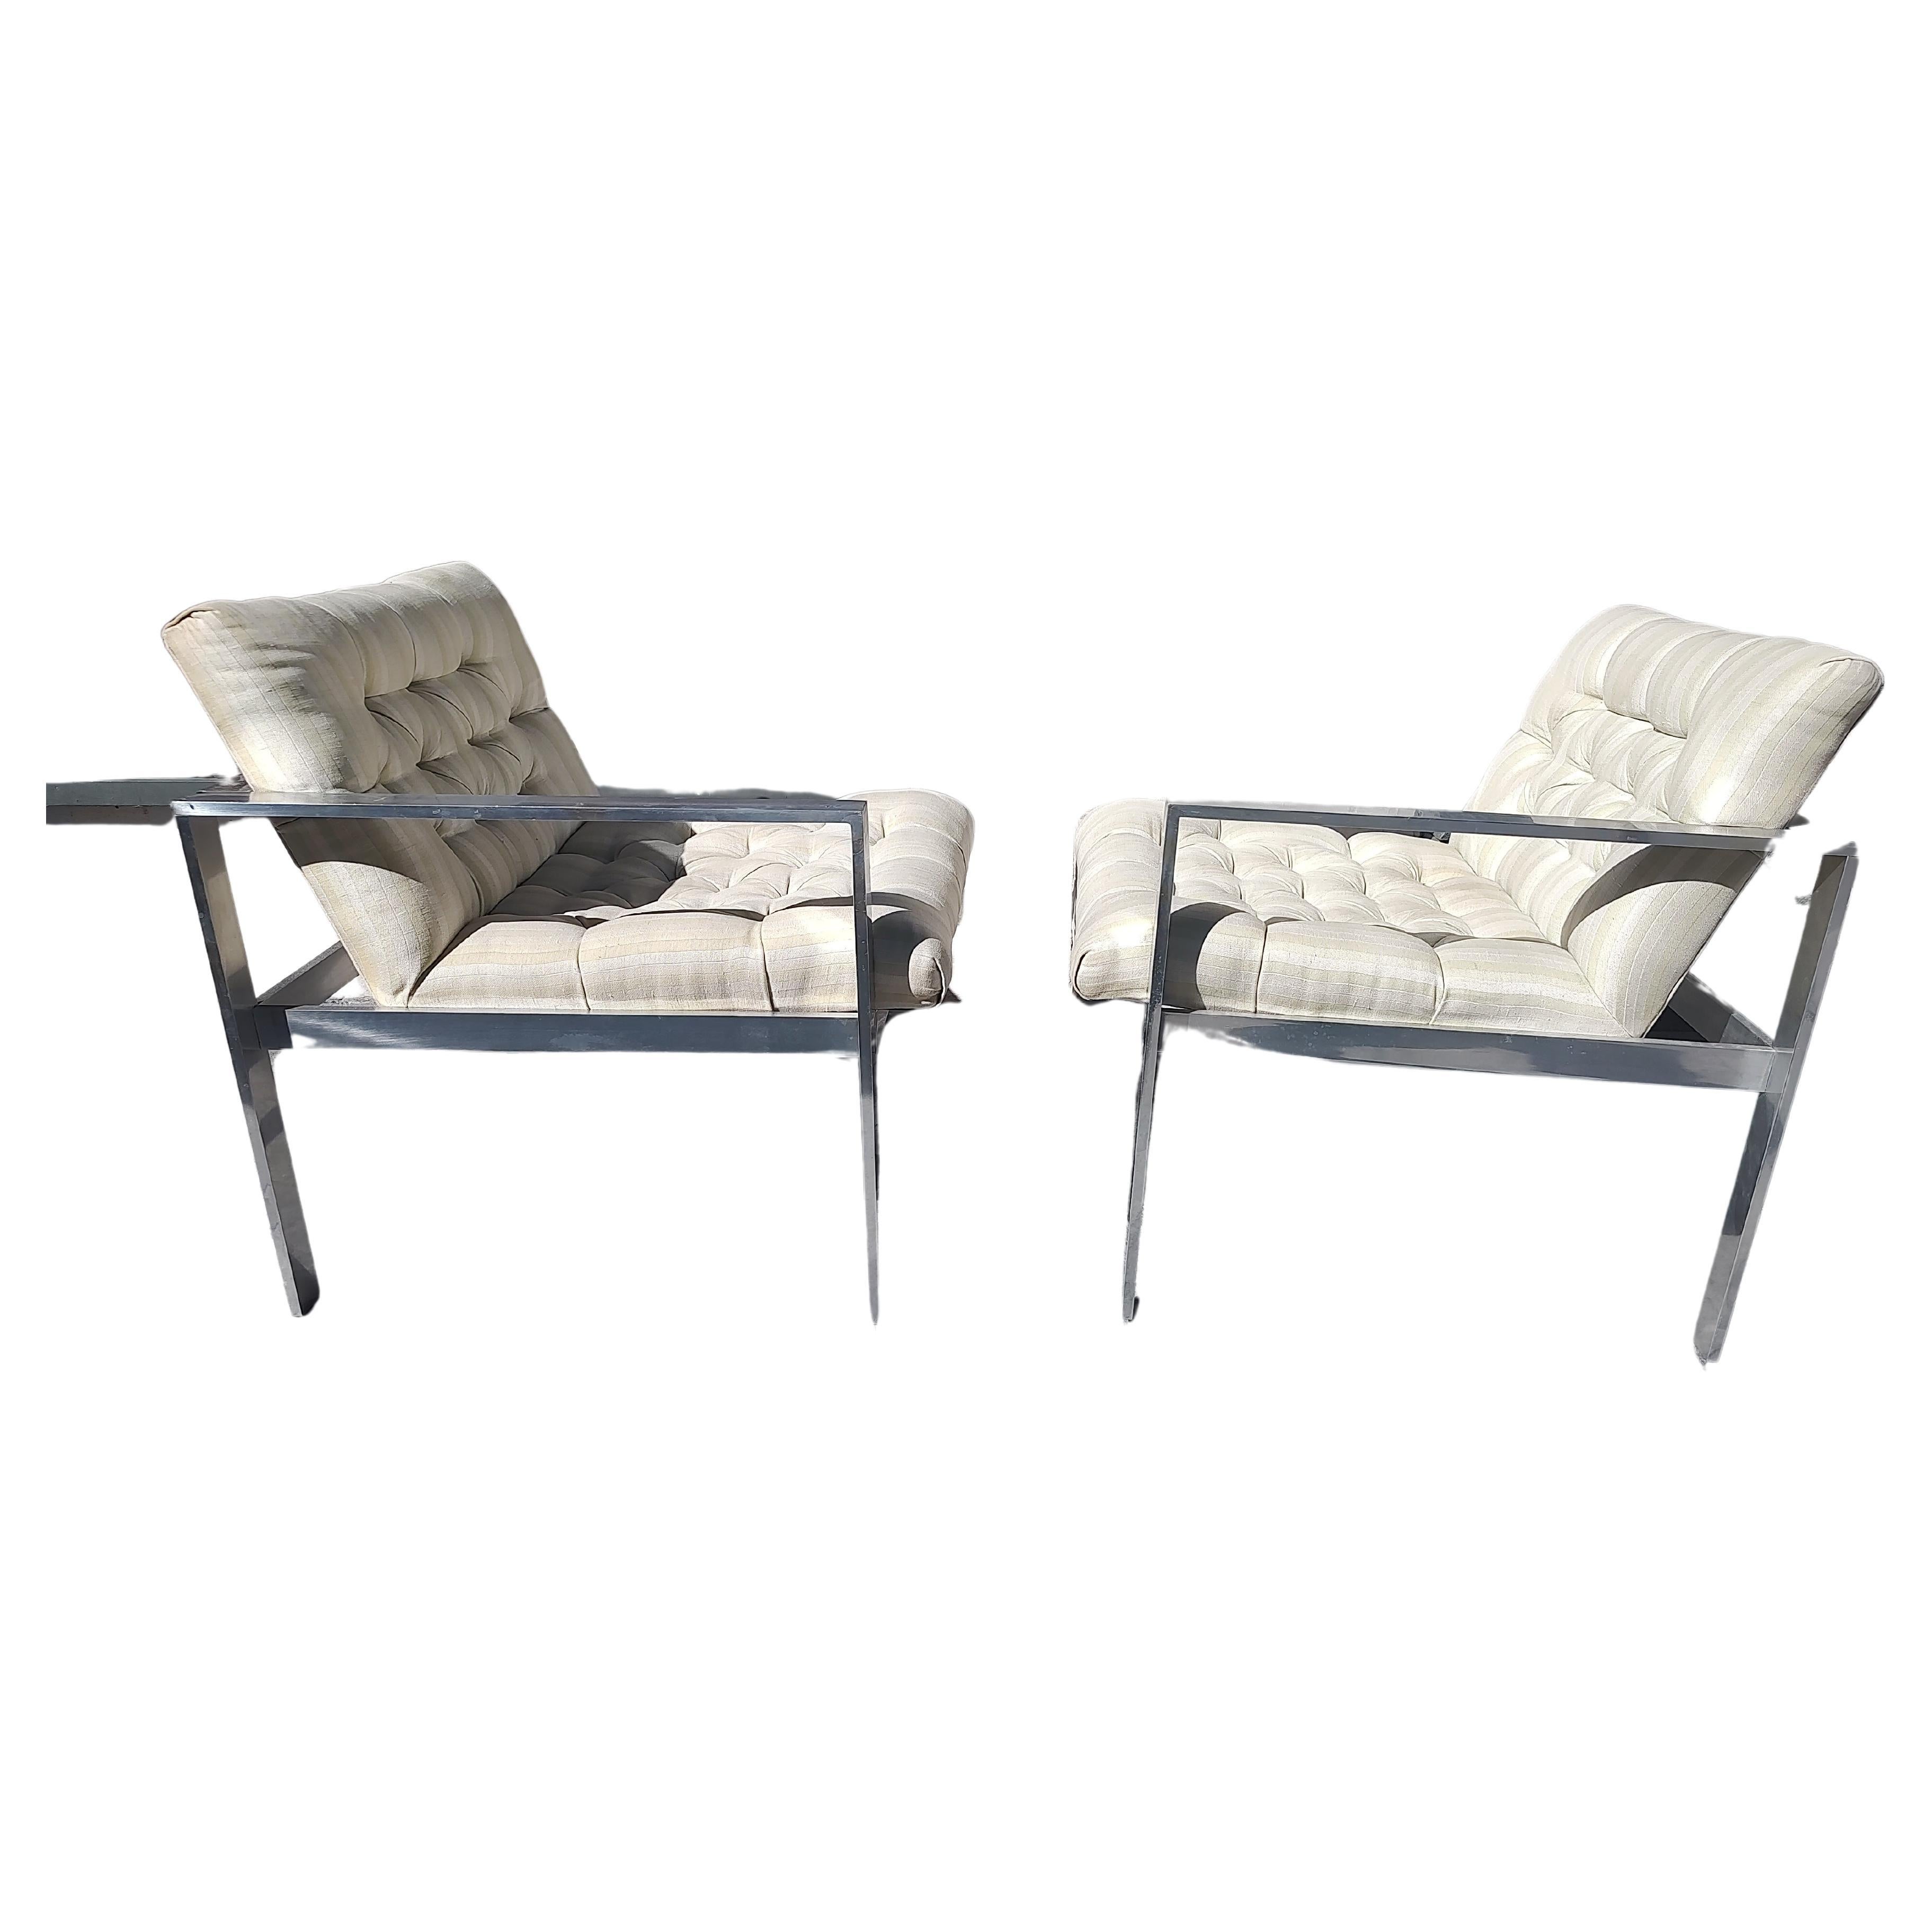 Hand-Crafted Pair of Mid-Century Modern Tufted Aluminum Lounge Chairs by Harvey Probber For Sale